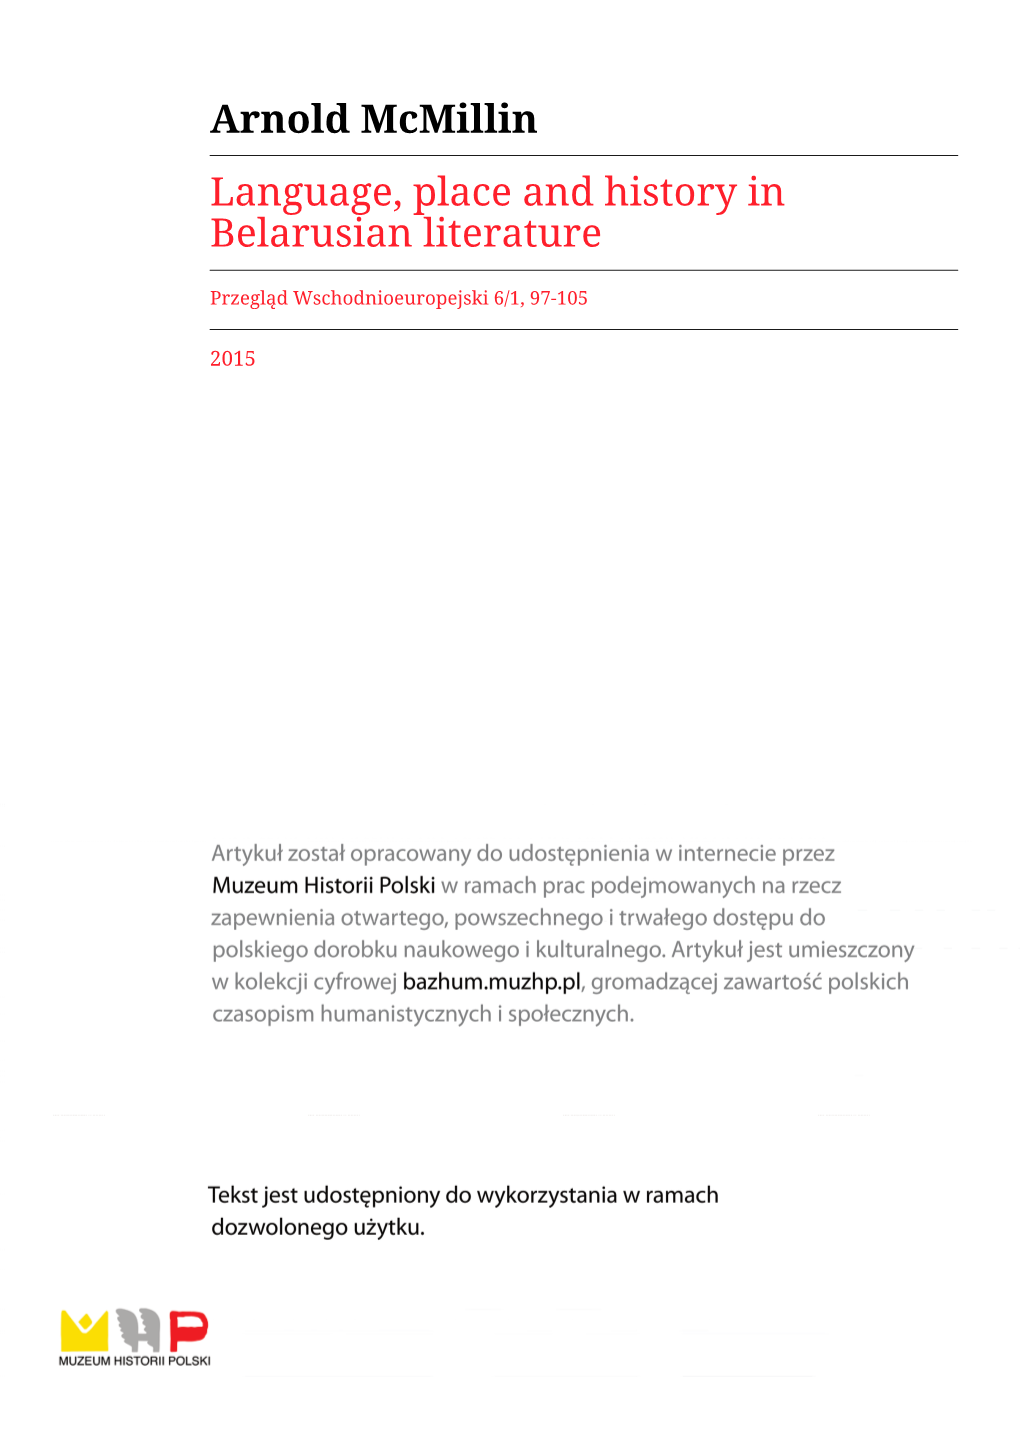 Arnold Mcmillin Language, Place and History in Belarusian Literature